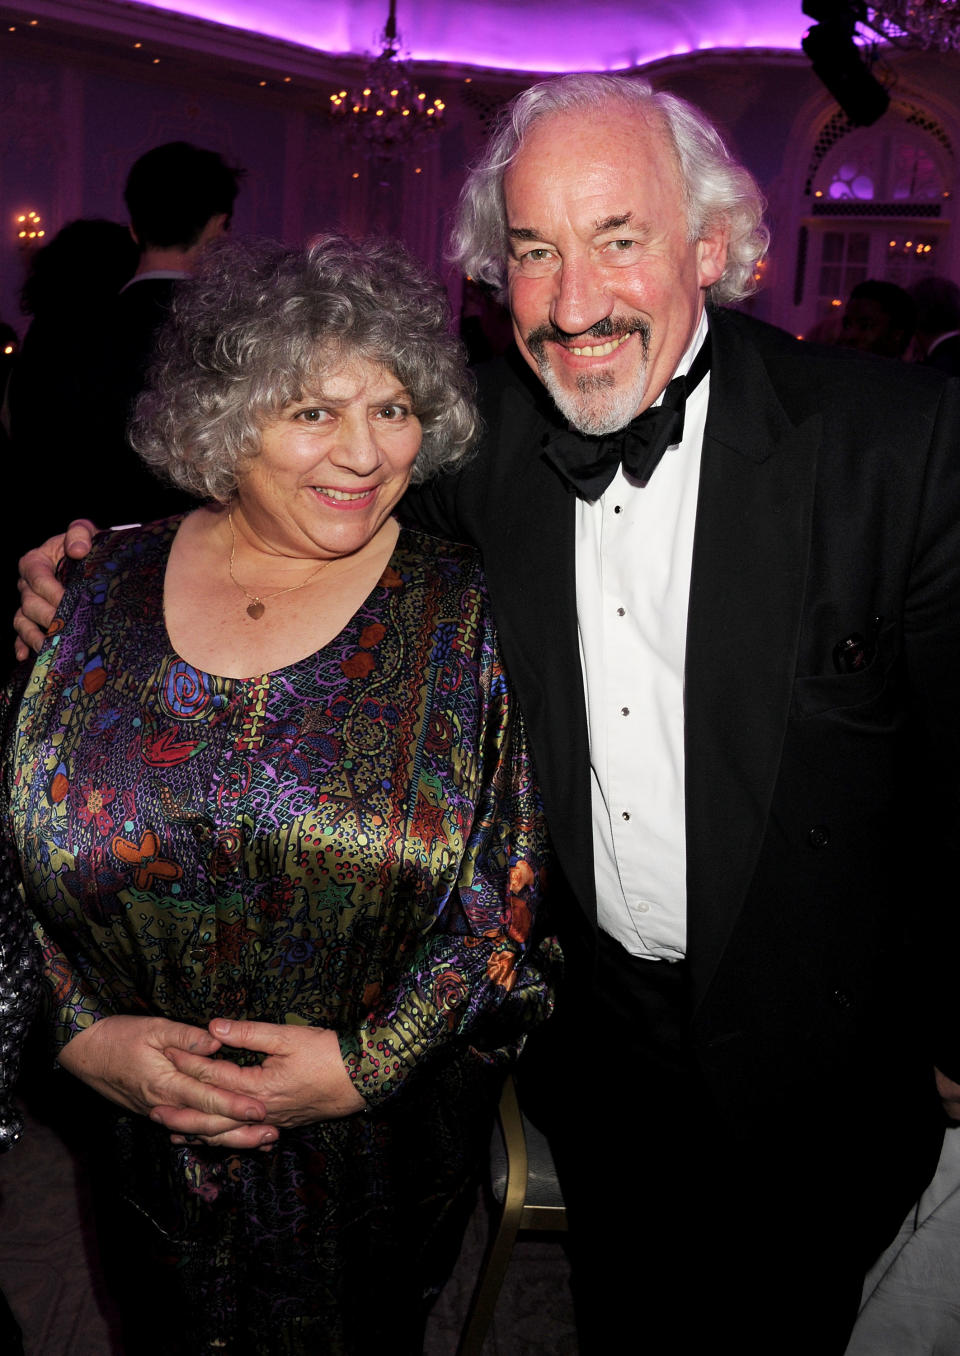 LONDON - NOVEMBER 28:  EMBARGOED FOR PUBLICATION IN UK TABLOID NEWSPAPERS UNTIL 48 HOURS AFTER CREATE DATE AND TIME. MANDATORY CREDIT PHOTO BY DAVE M. BENETT/GETTY IMAGES REQUIRED Miriam Margolyes and Simon Callow attends the London Evening Standard Theatre Awards ceremony at The Savoy Hotel on November 28, 2010 in London, England. (Photo by Dave M. Benett/Getty Images)